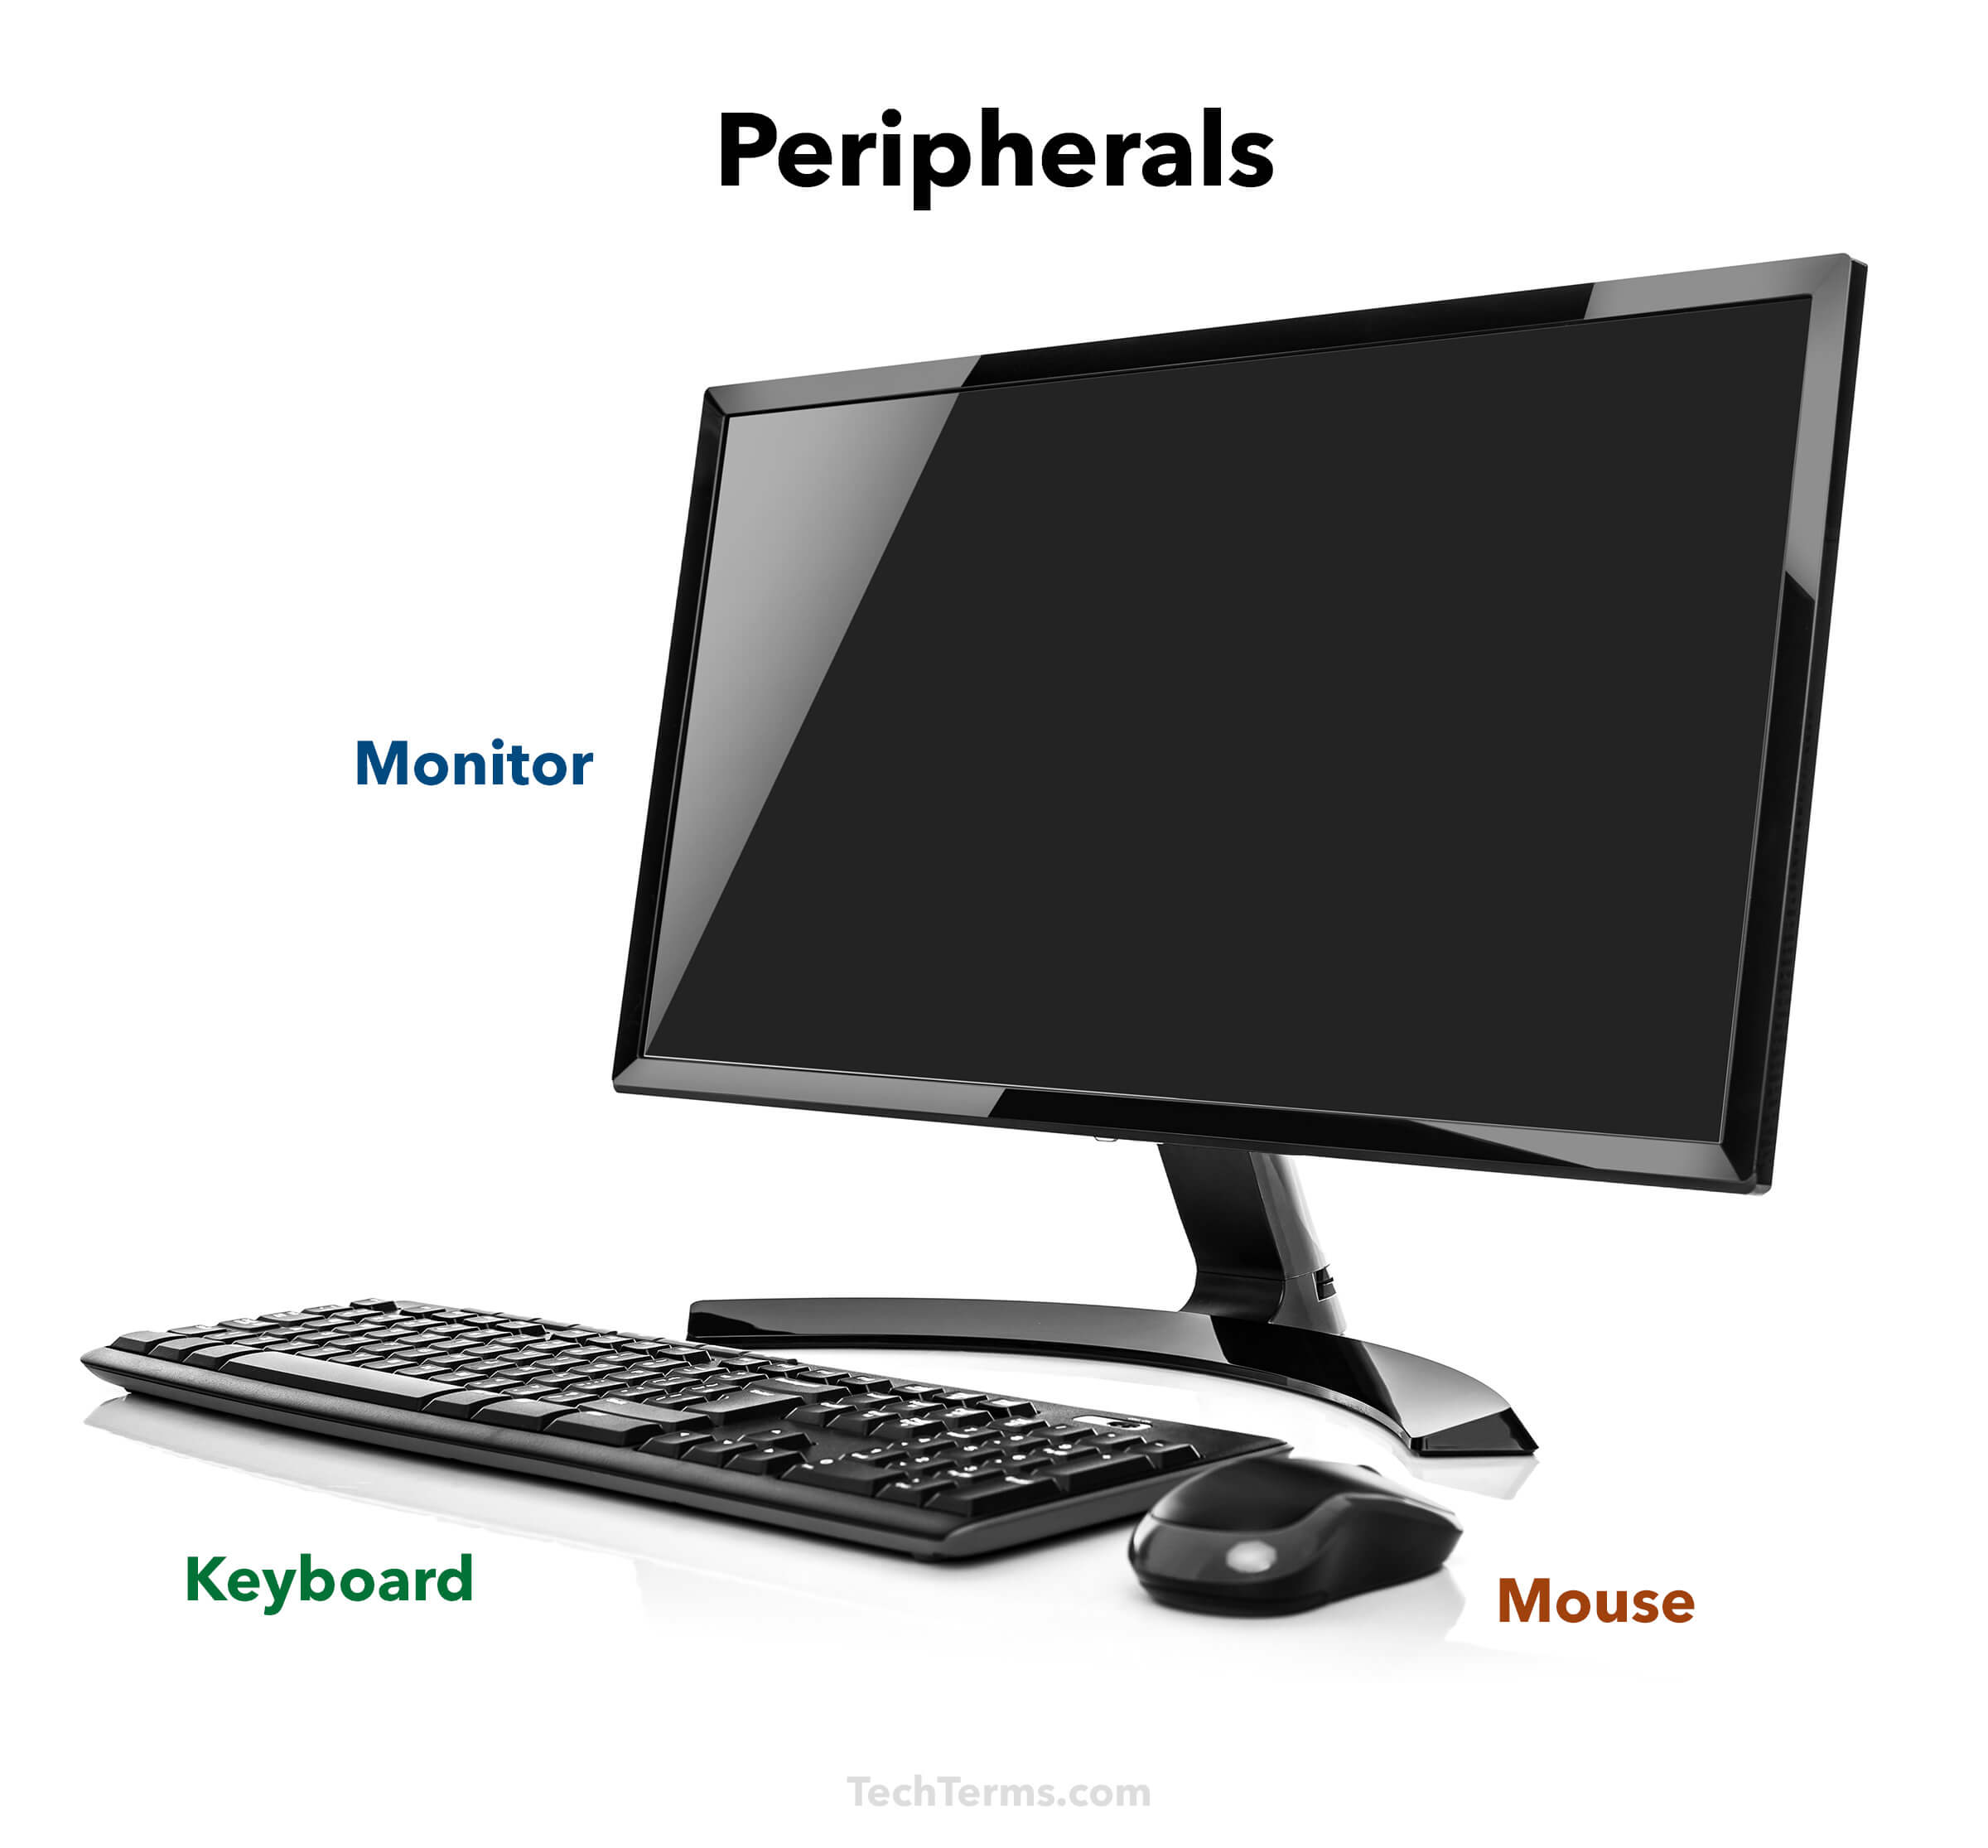 Peripheral Definition - What is a computer peripheral?